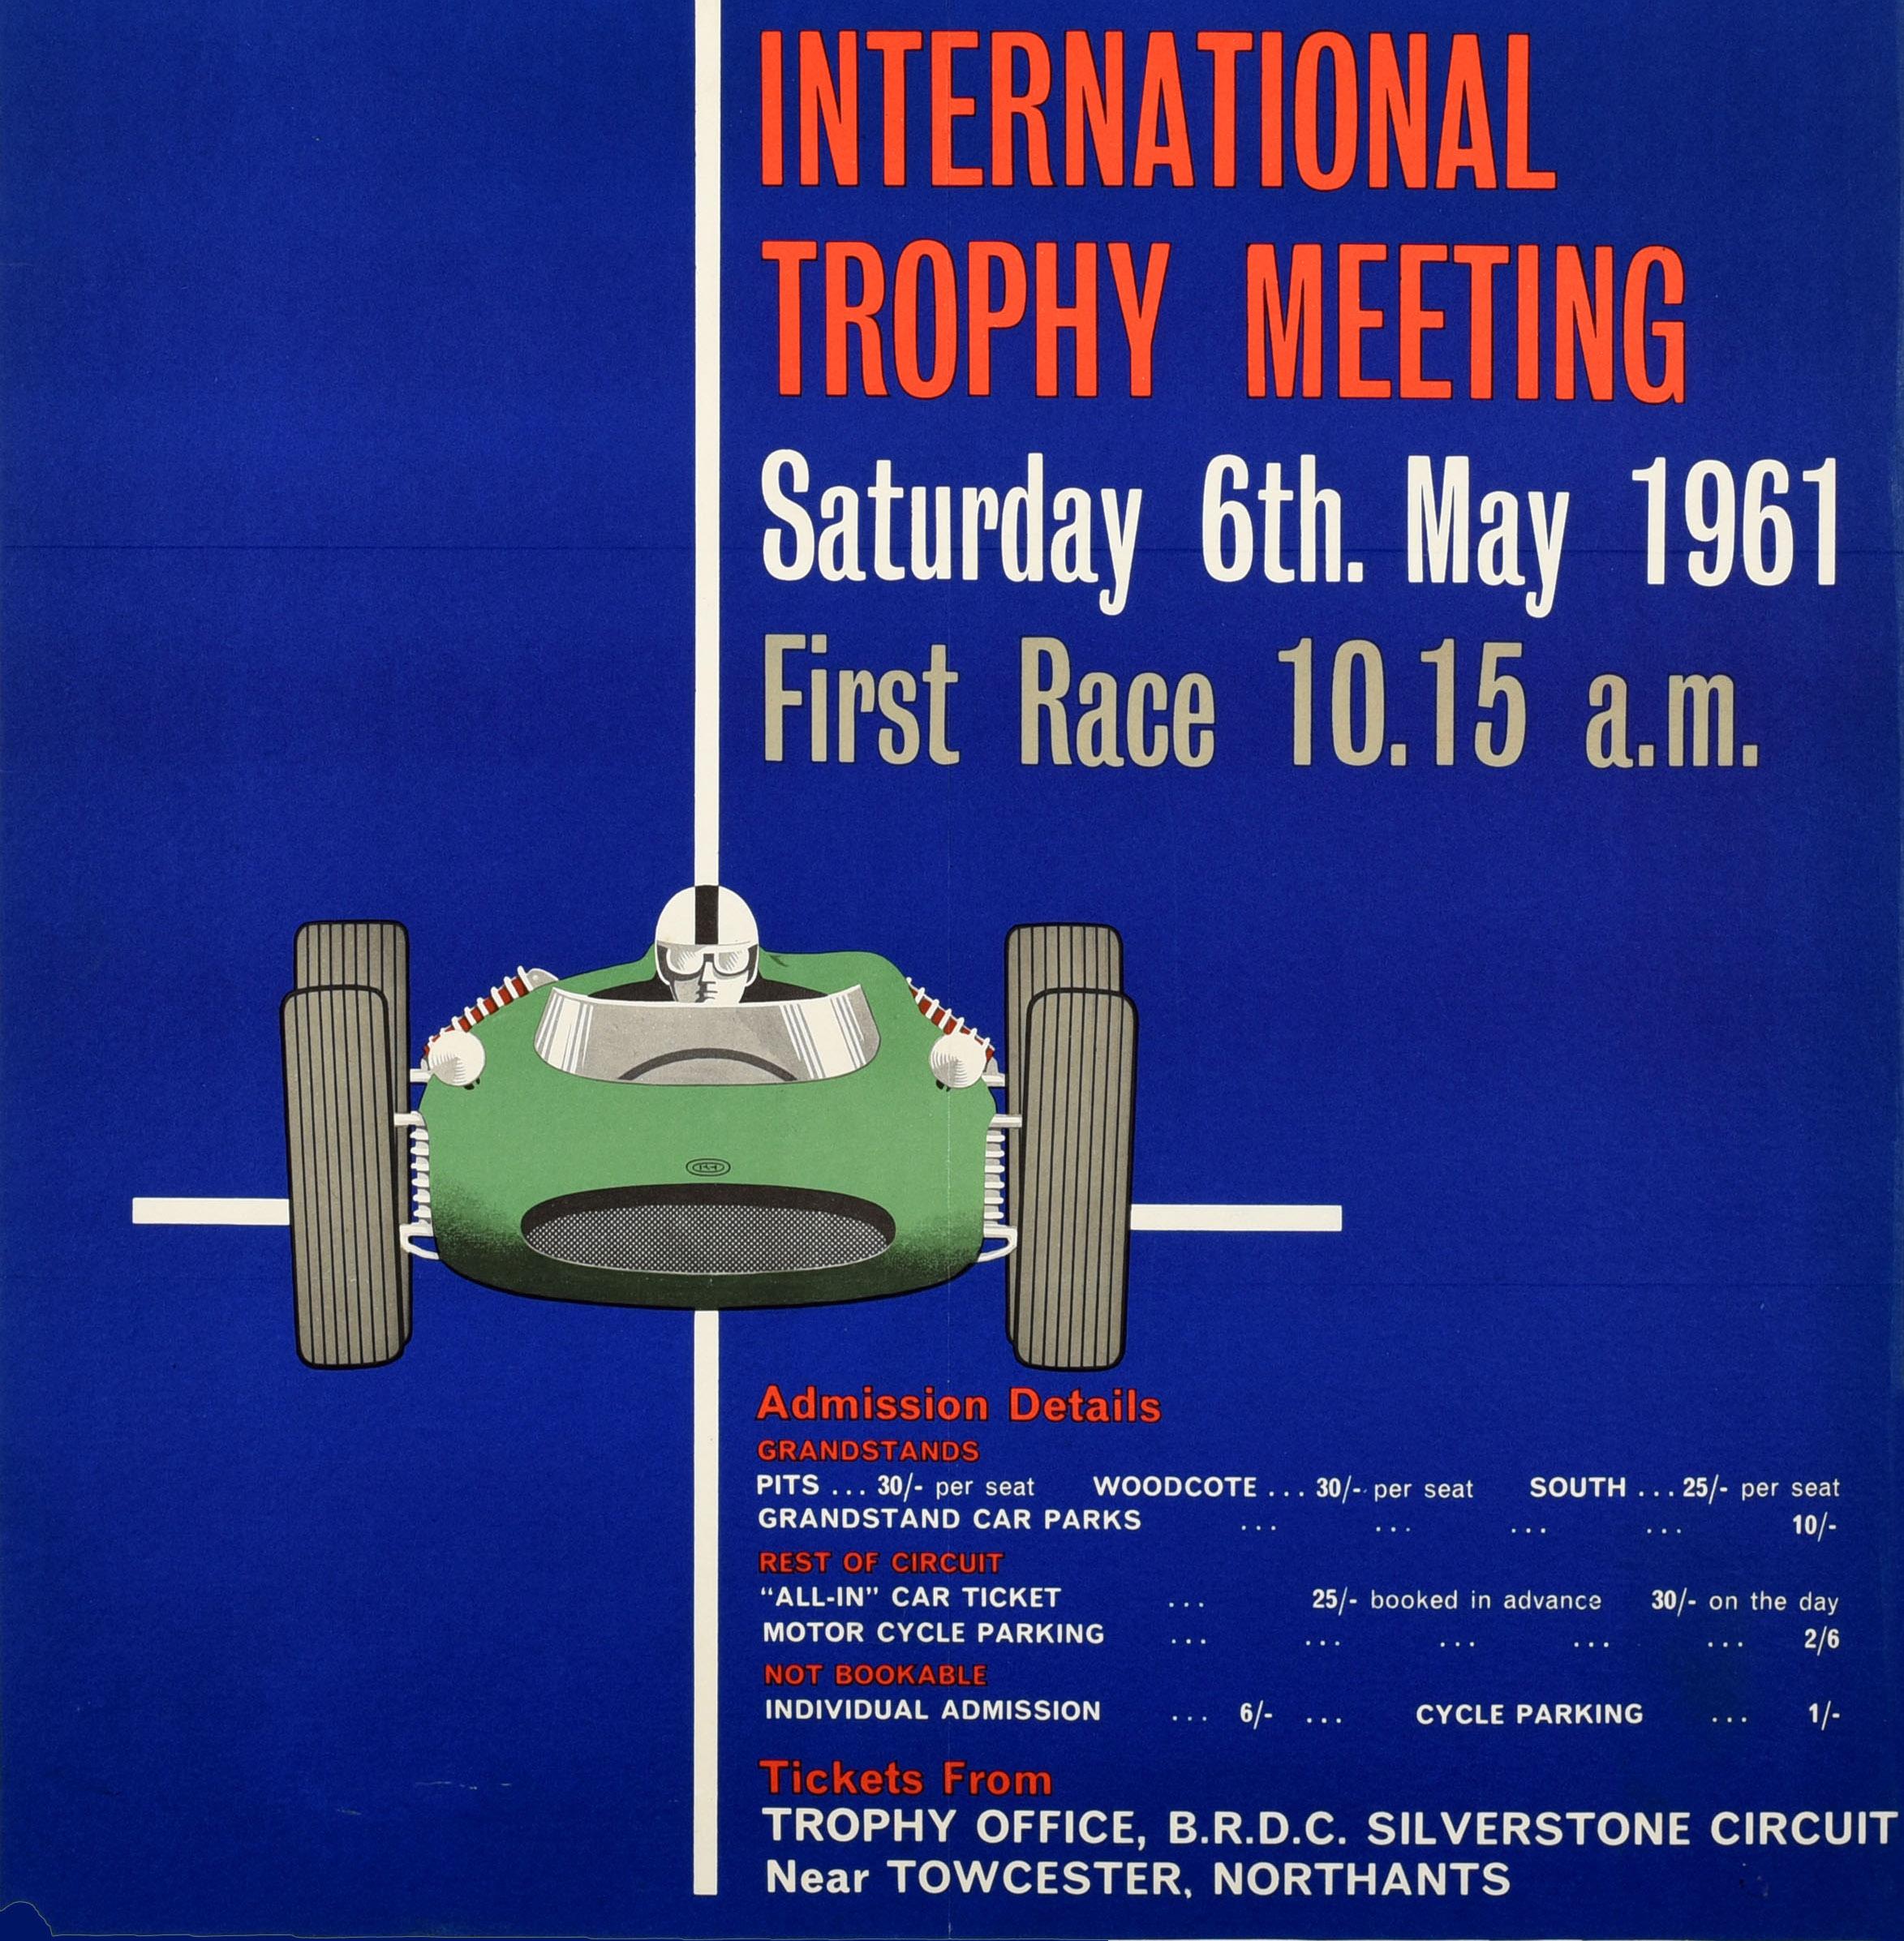 Original vintage Formula One motorsport poster issued by the British Racing Drivers' Club (BRDC) for the 13th International Trophy Meeting held at Silverstone on 6 May 1961. Great design featuring a green racing car against a blue background and